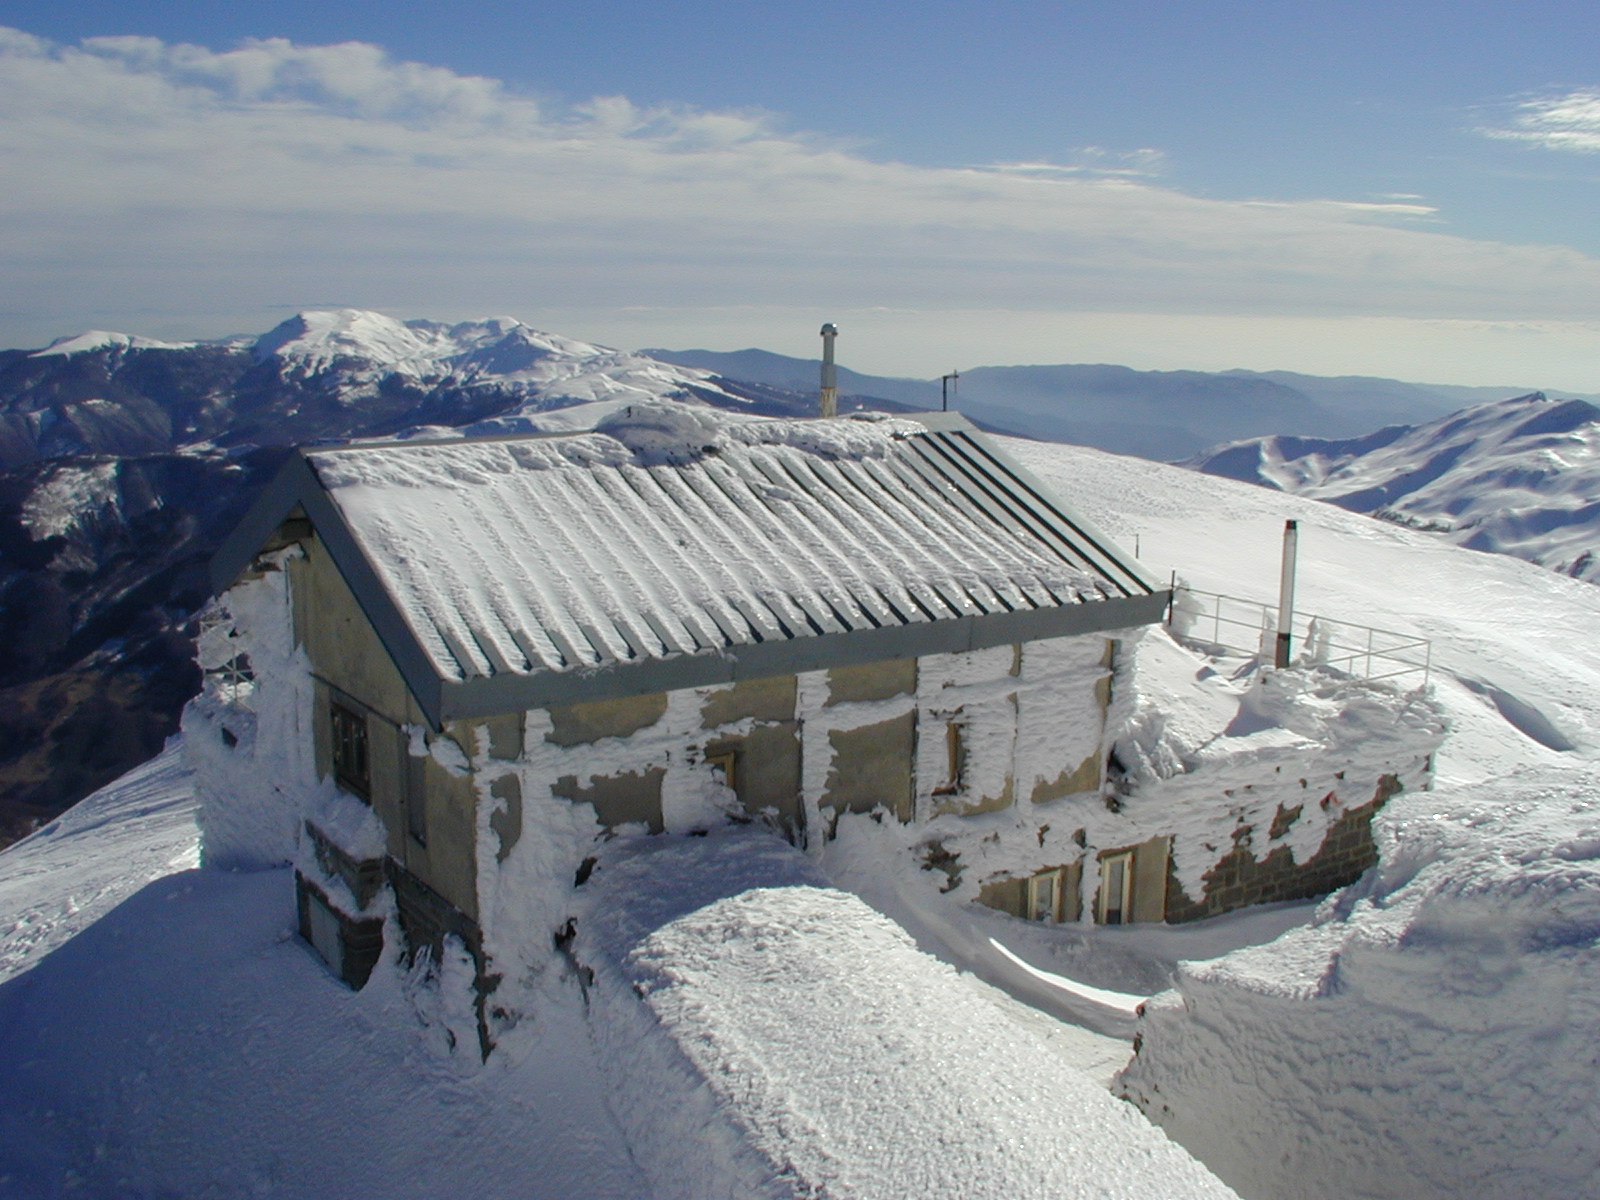 A winter view of the CNR Observatory of Monte Cimone